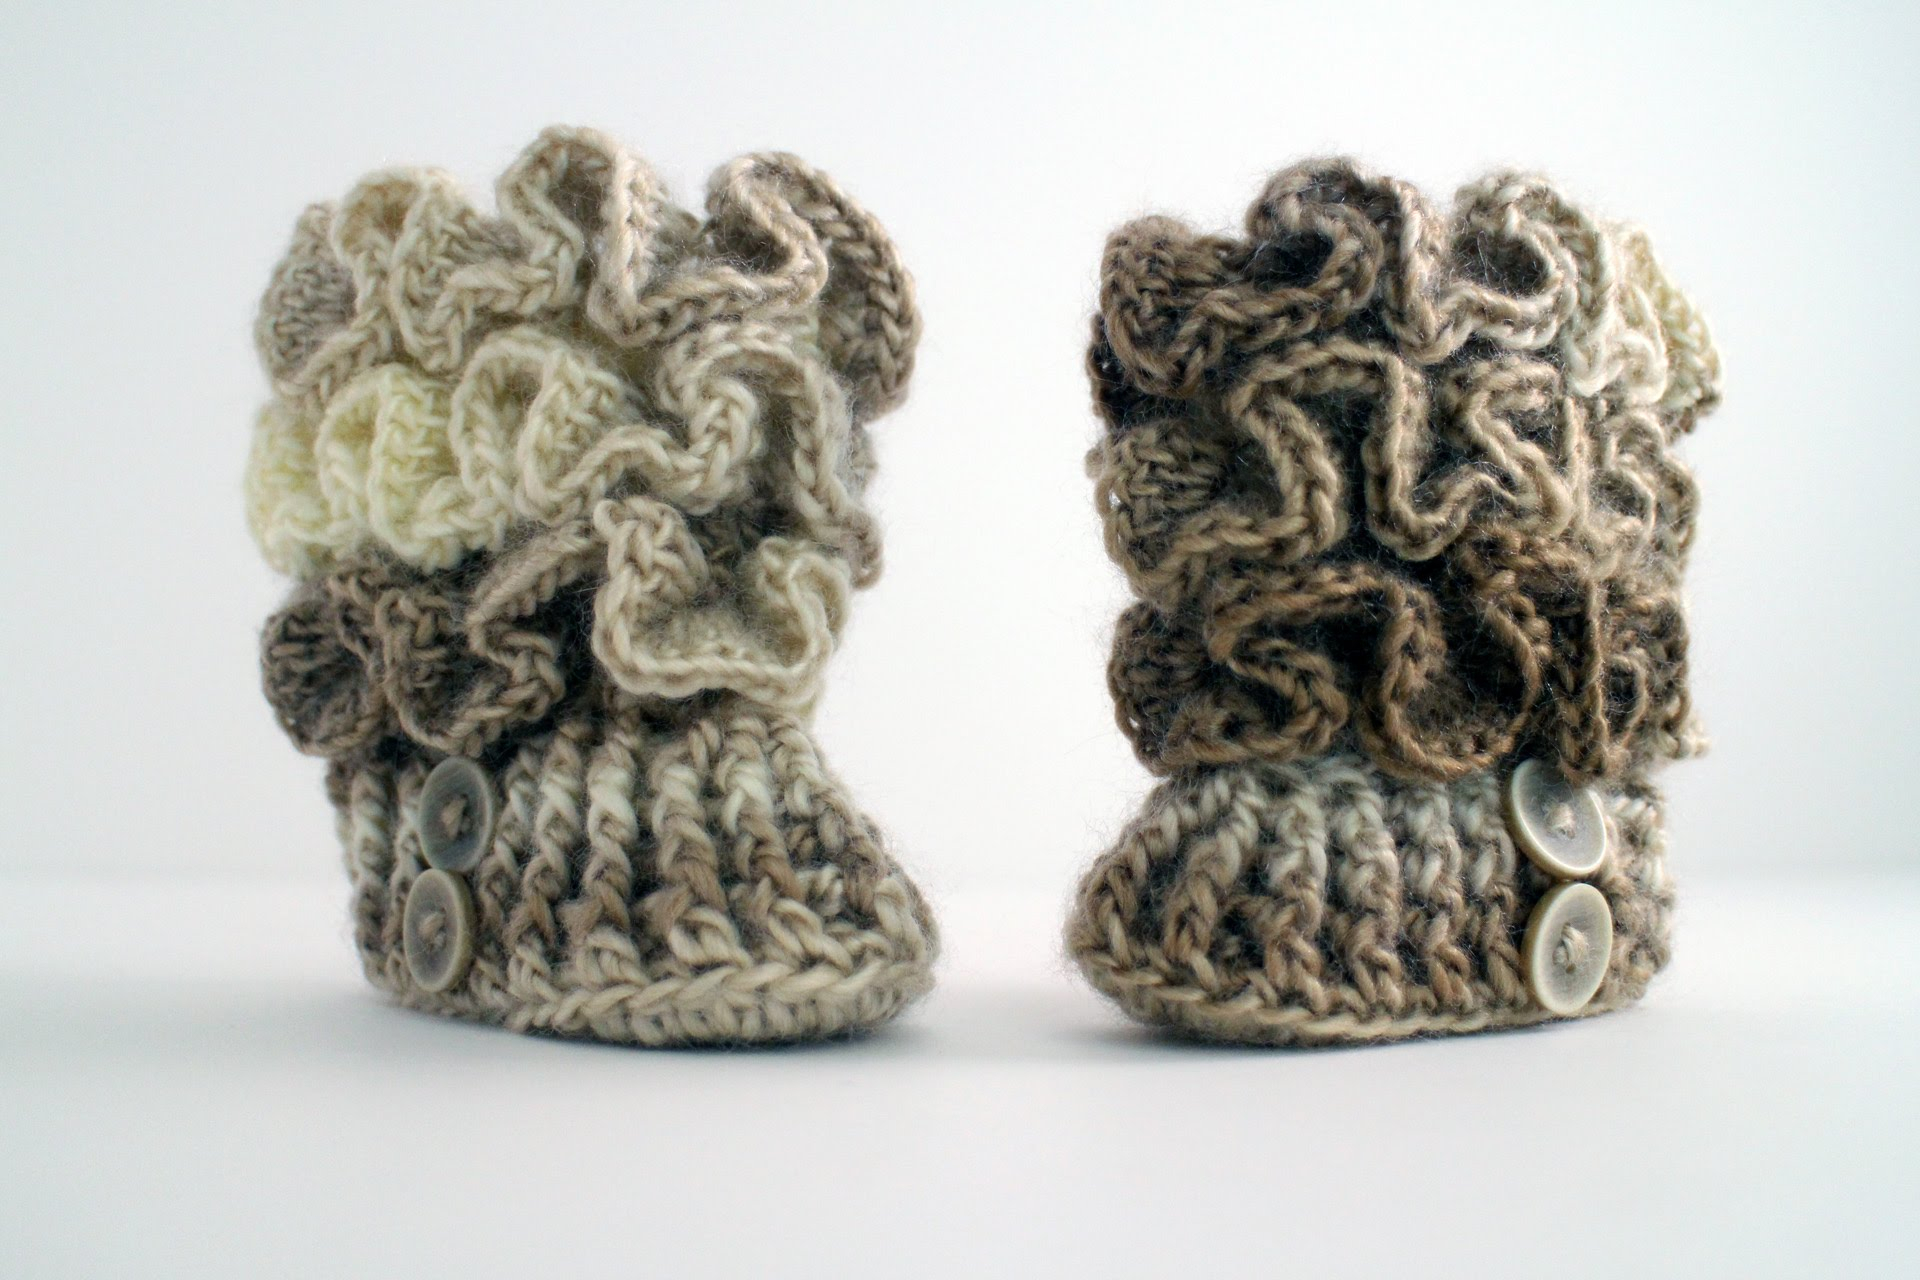 Crochet Pattern For Baby Booties Knitting Patterns Booties How To Crochet Ba Booties Knitting